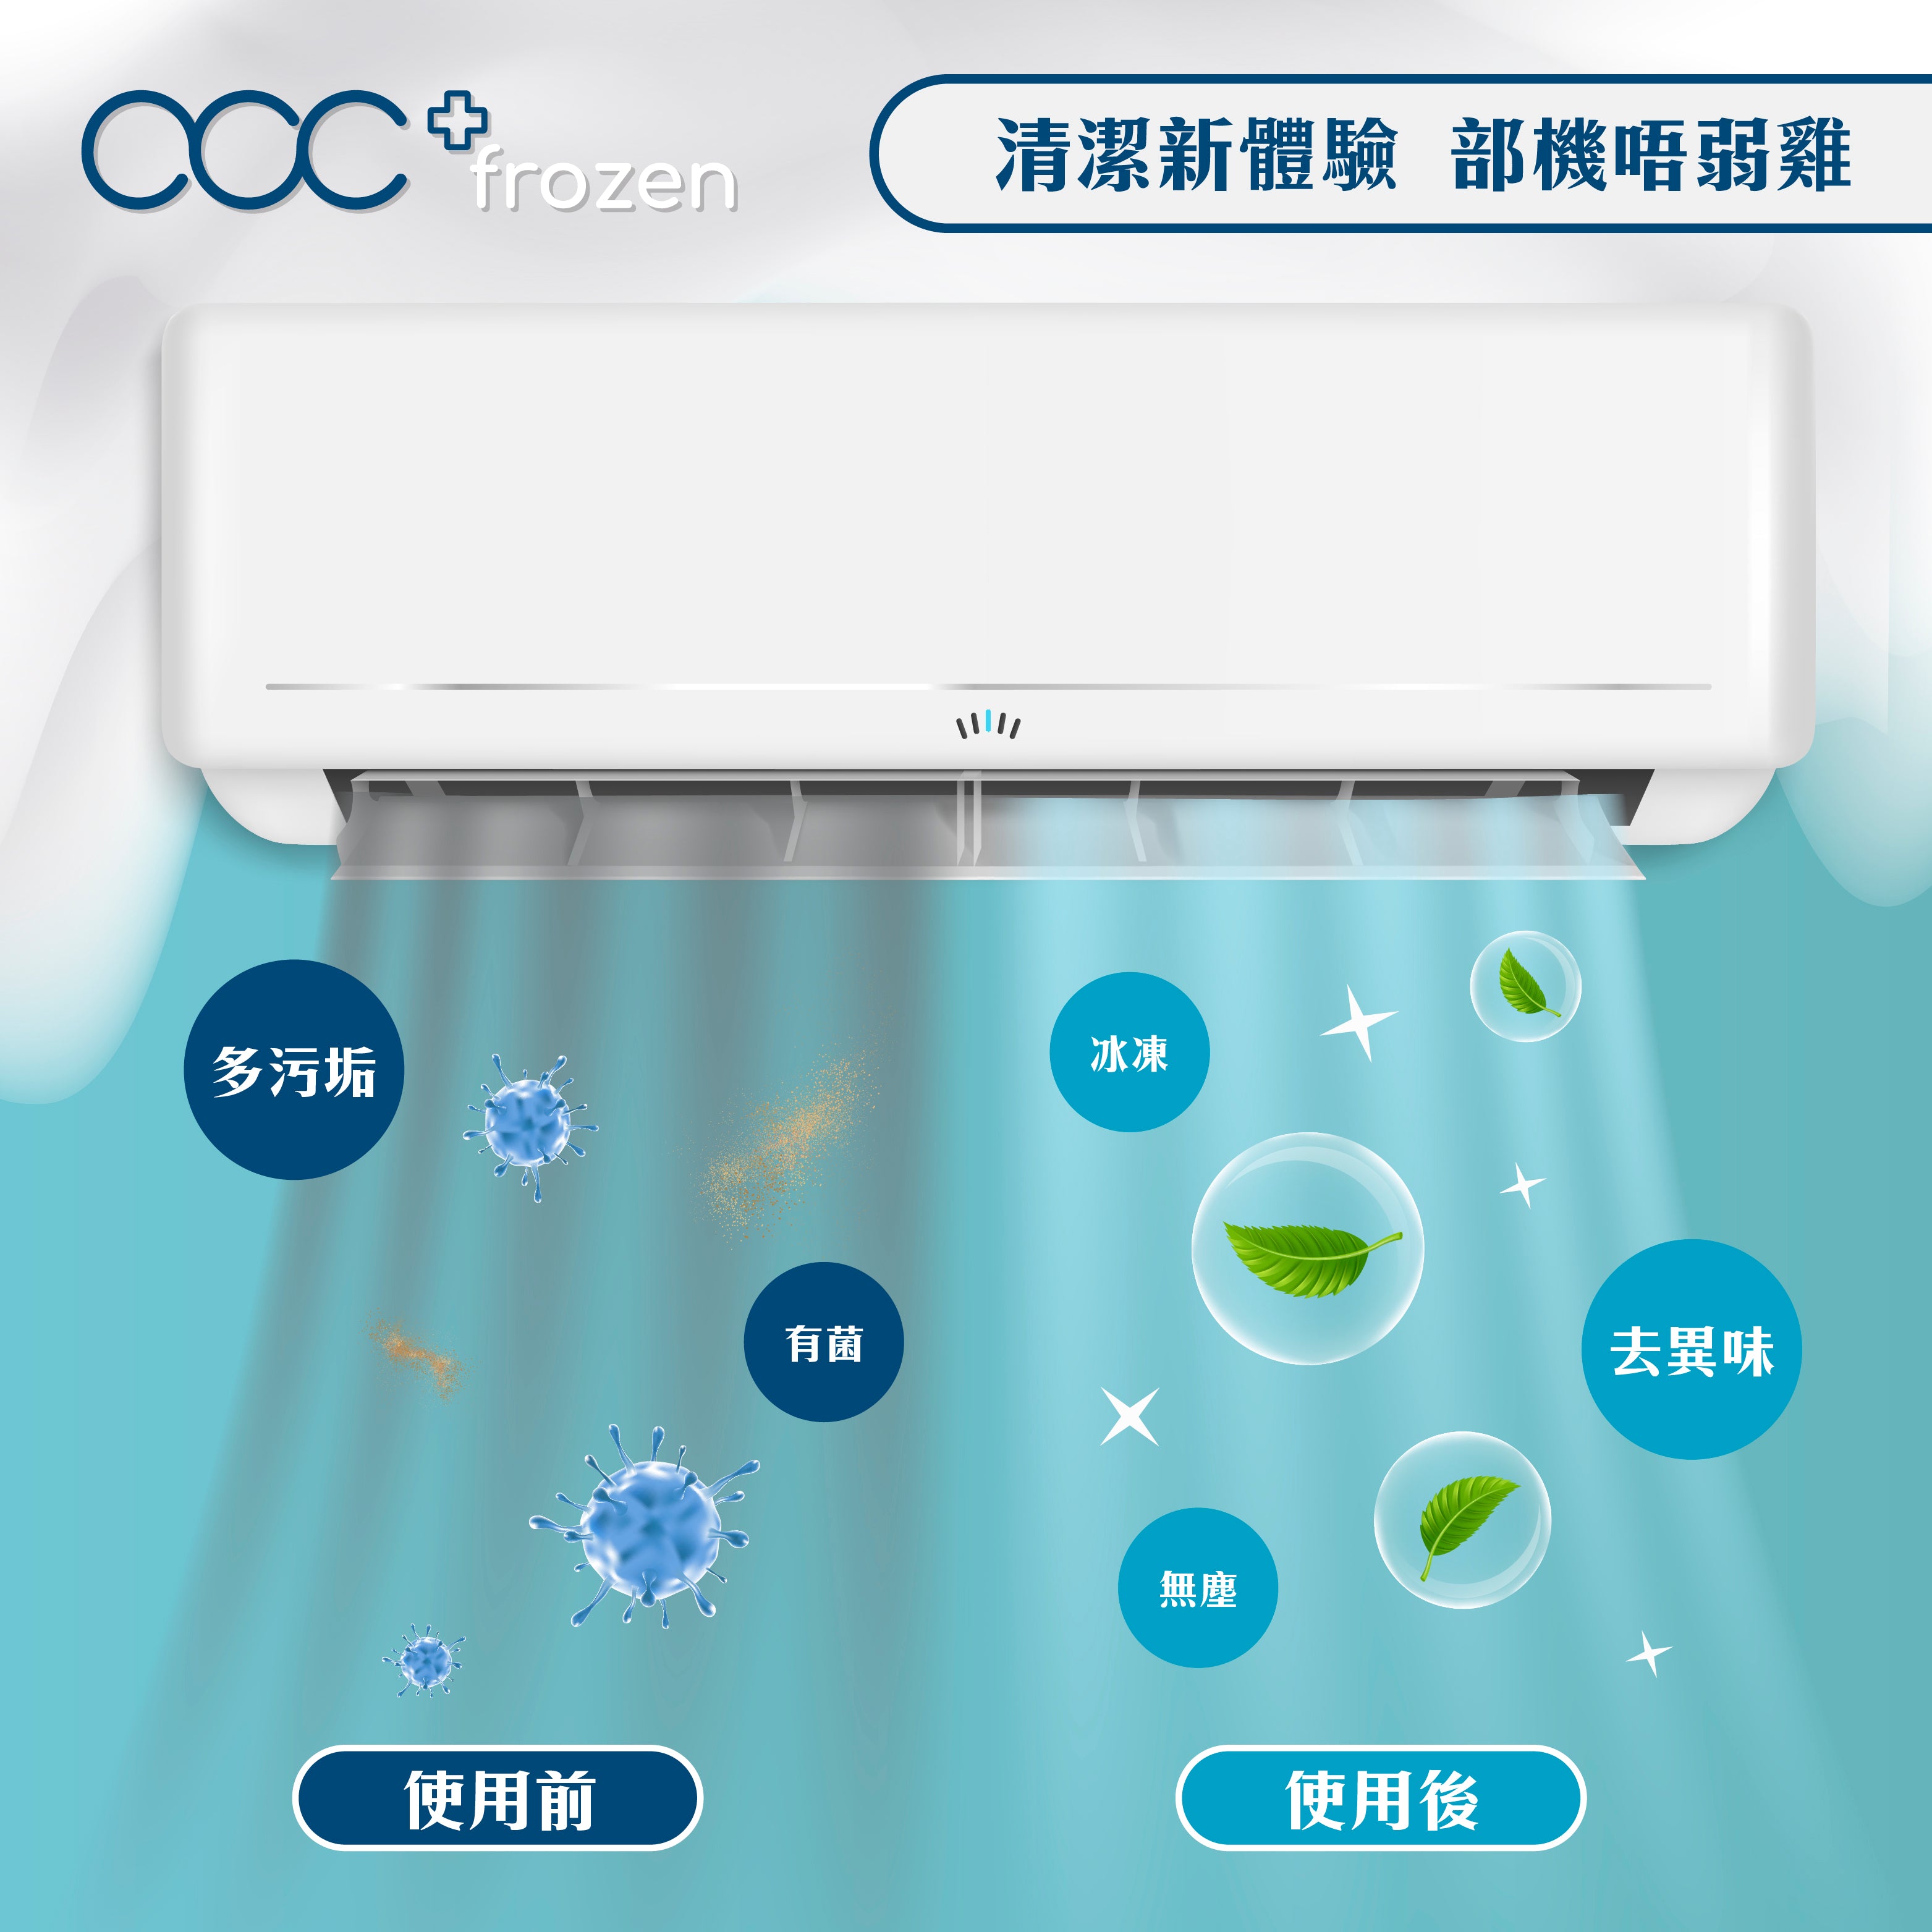 acc+ frozen air conditioner popping agent is on sale at an affordable price 